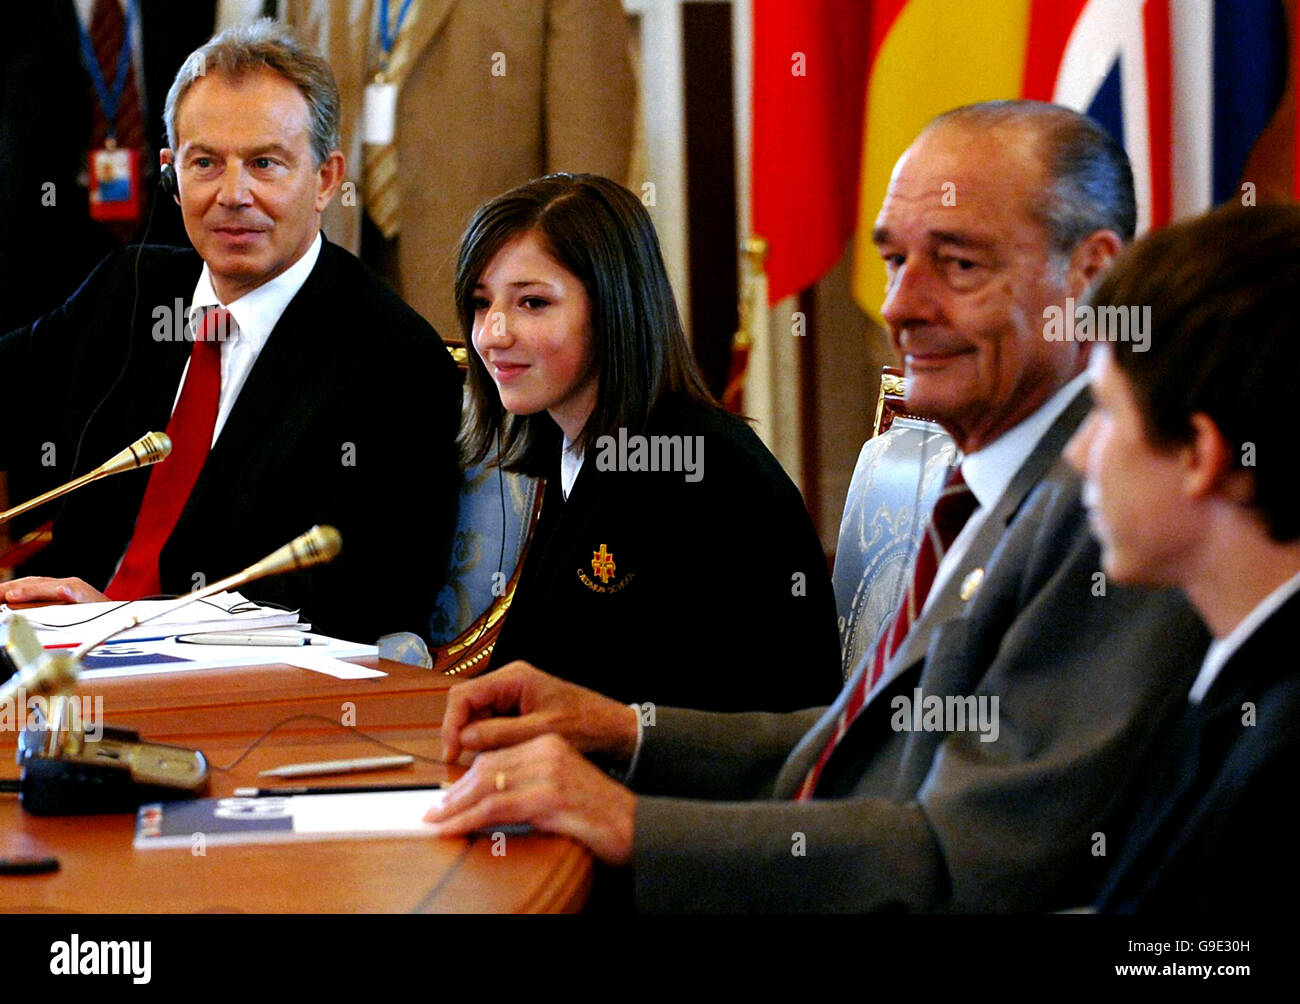 Sophie Harrison from Caedmon School, Whitby, North Yorkshire, sits with Britain's Prime Minister Tony Blair and the other G8 world leaders including French President Jacques Chirac at a session of the J8 in St Petersburg, Russia. Stock Photo